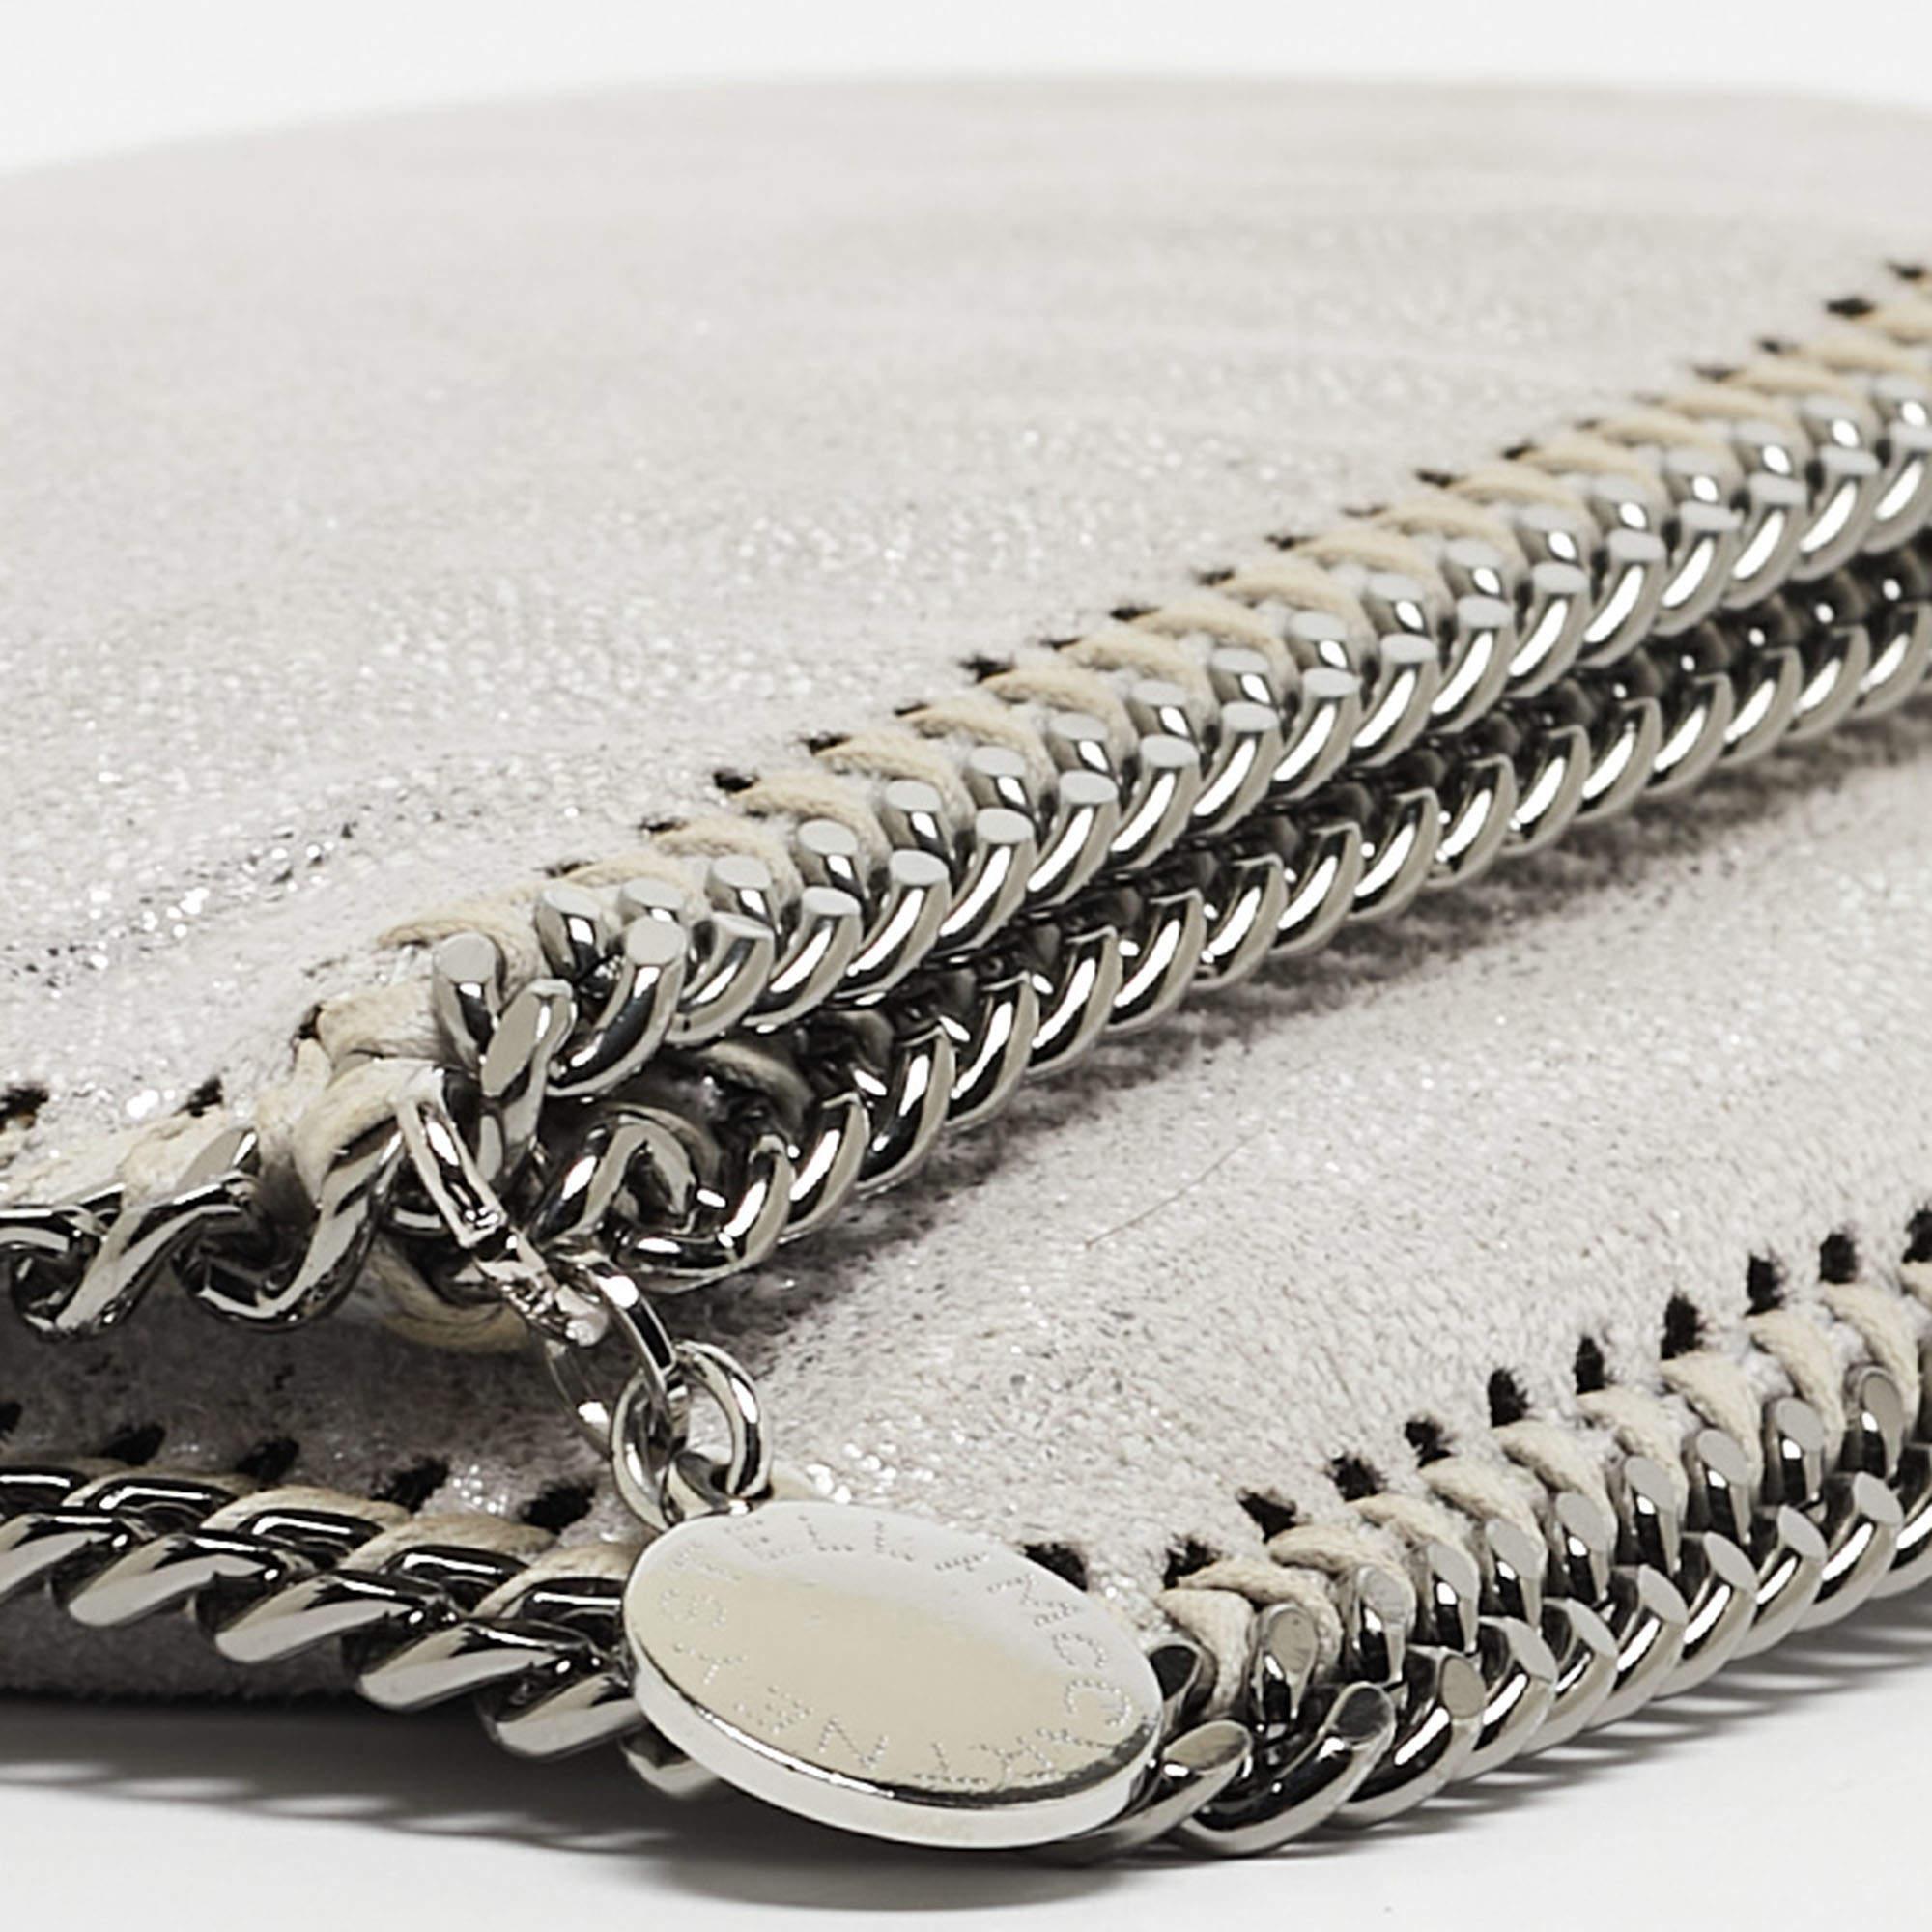 Stella McCartney Silver Faux Leather Falabella Fold-Over Clutch For Sale 5